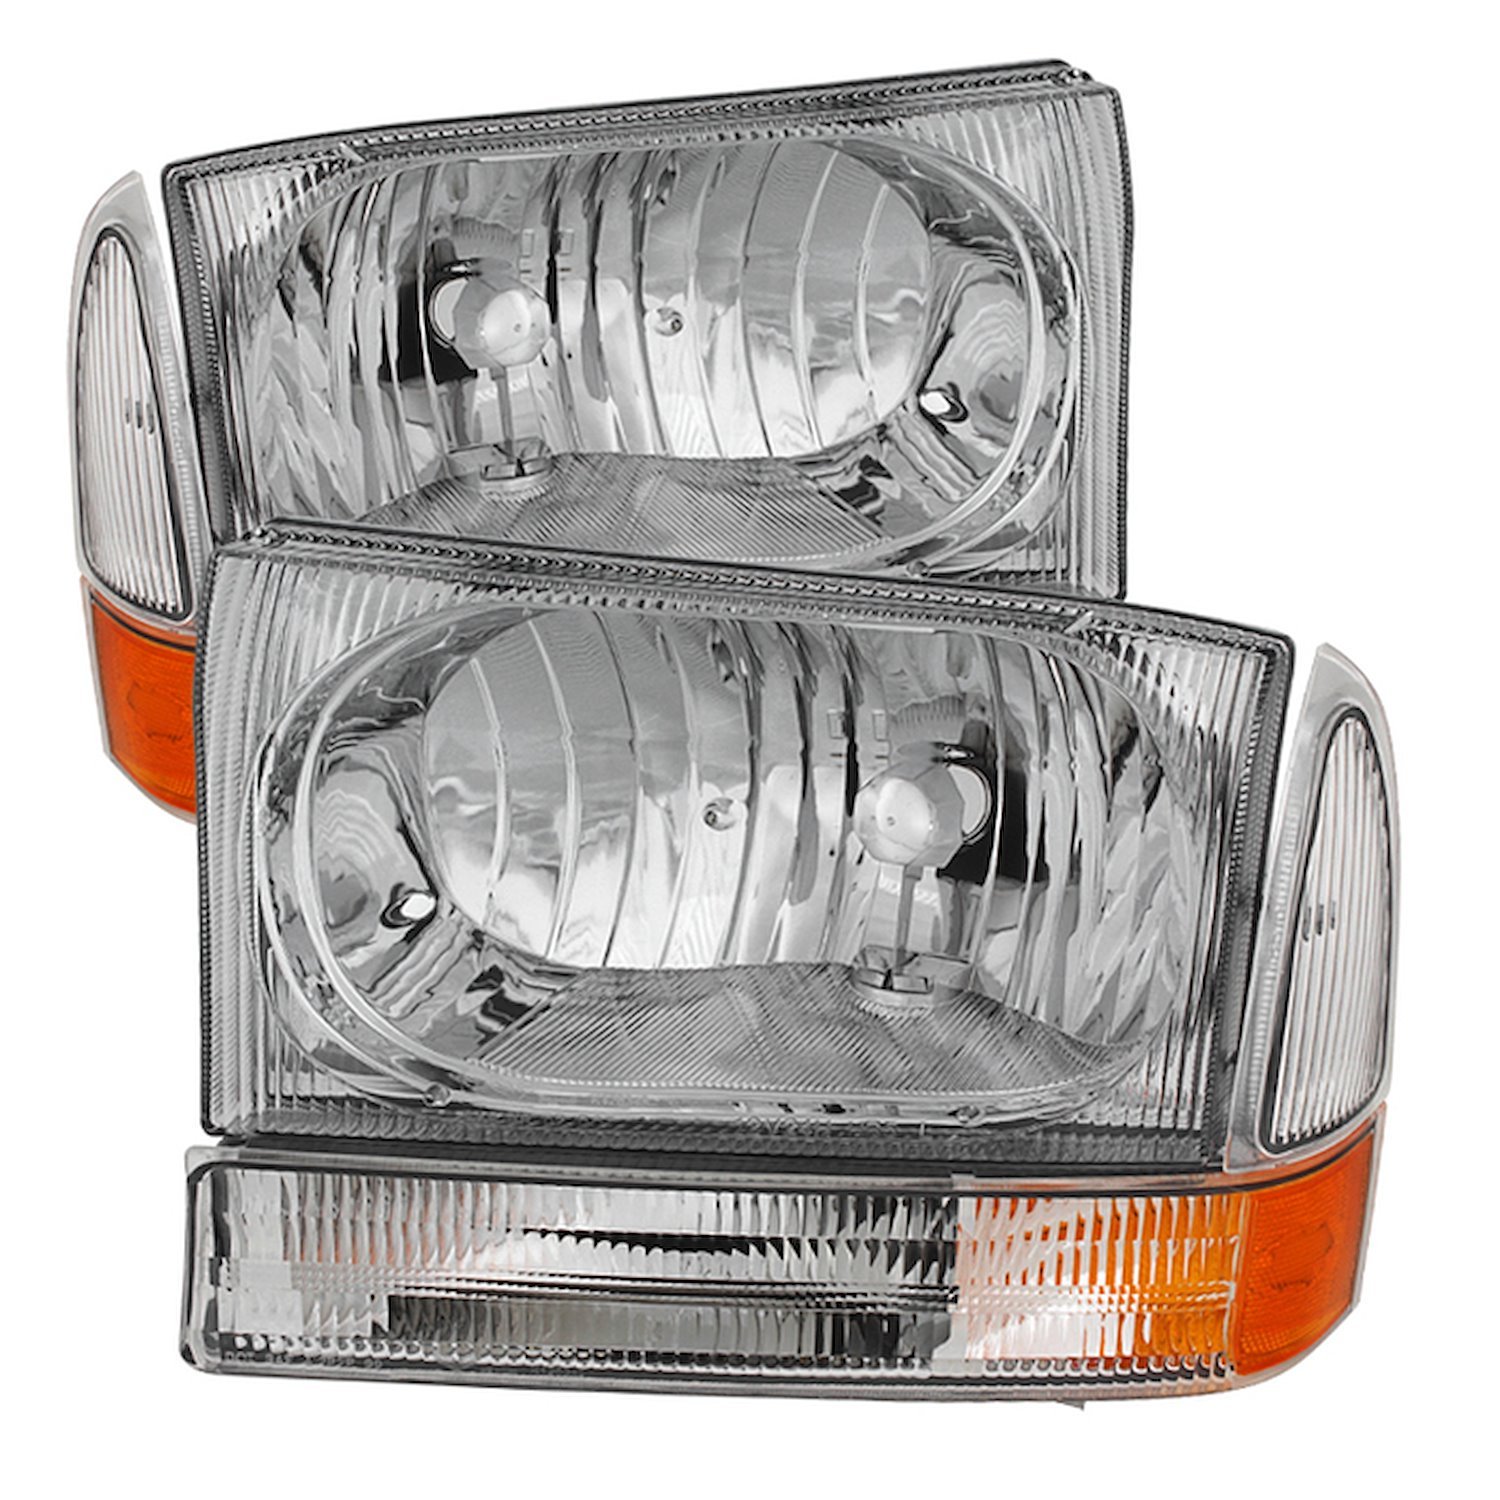 xTune Crystal Headlights 1999-2004 Ford F250/350/450 Super Duty/Excursion